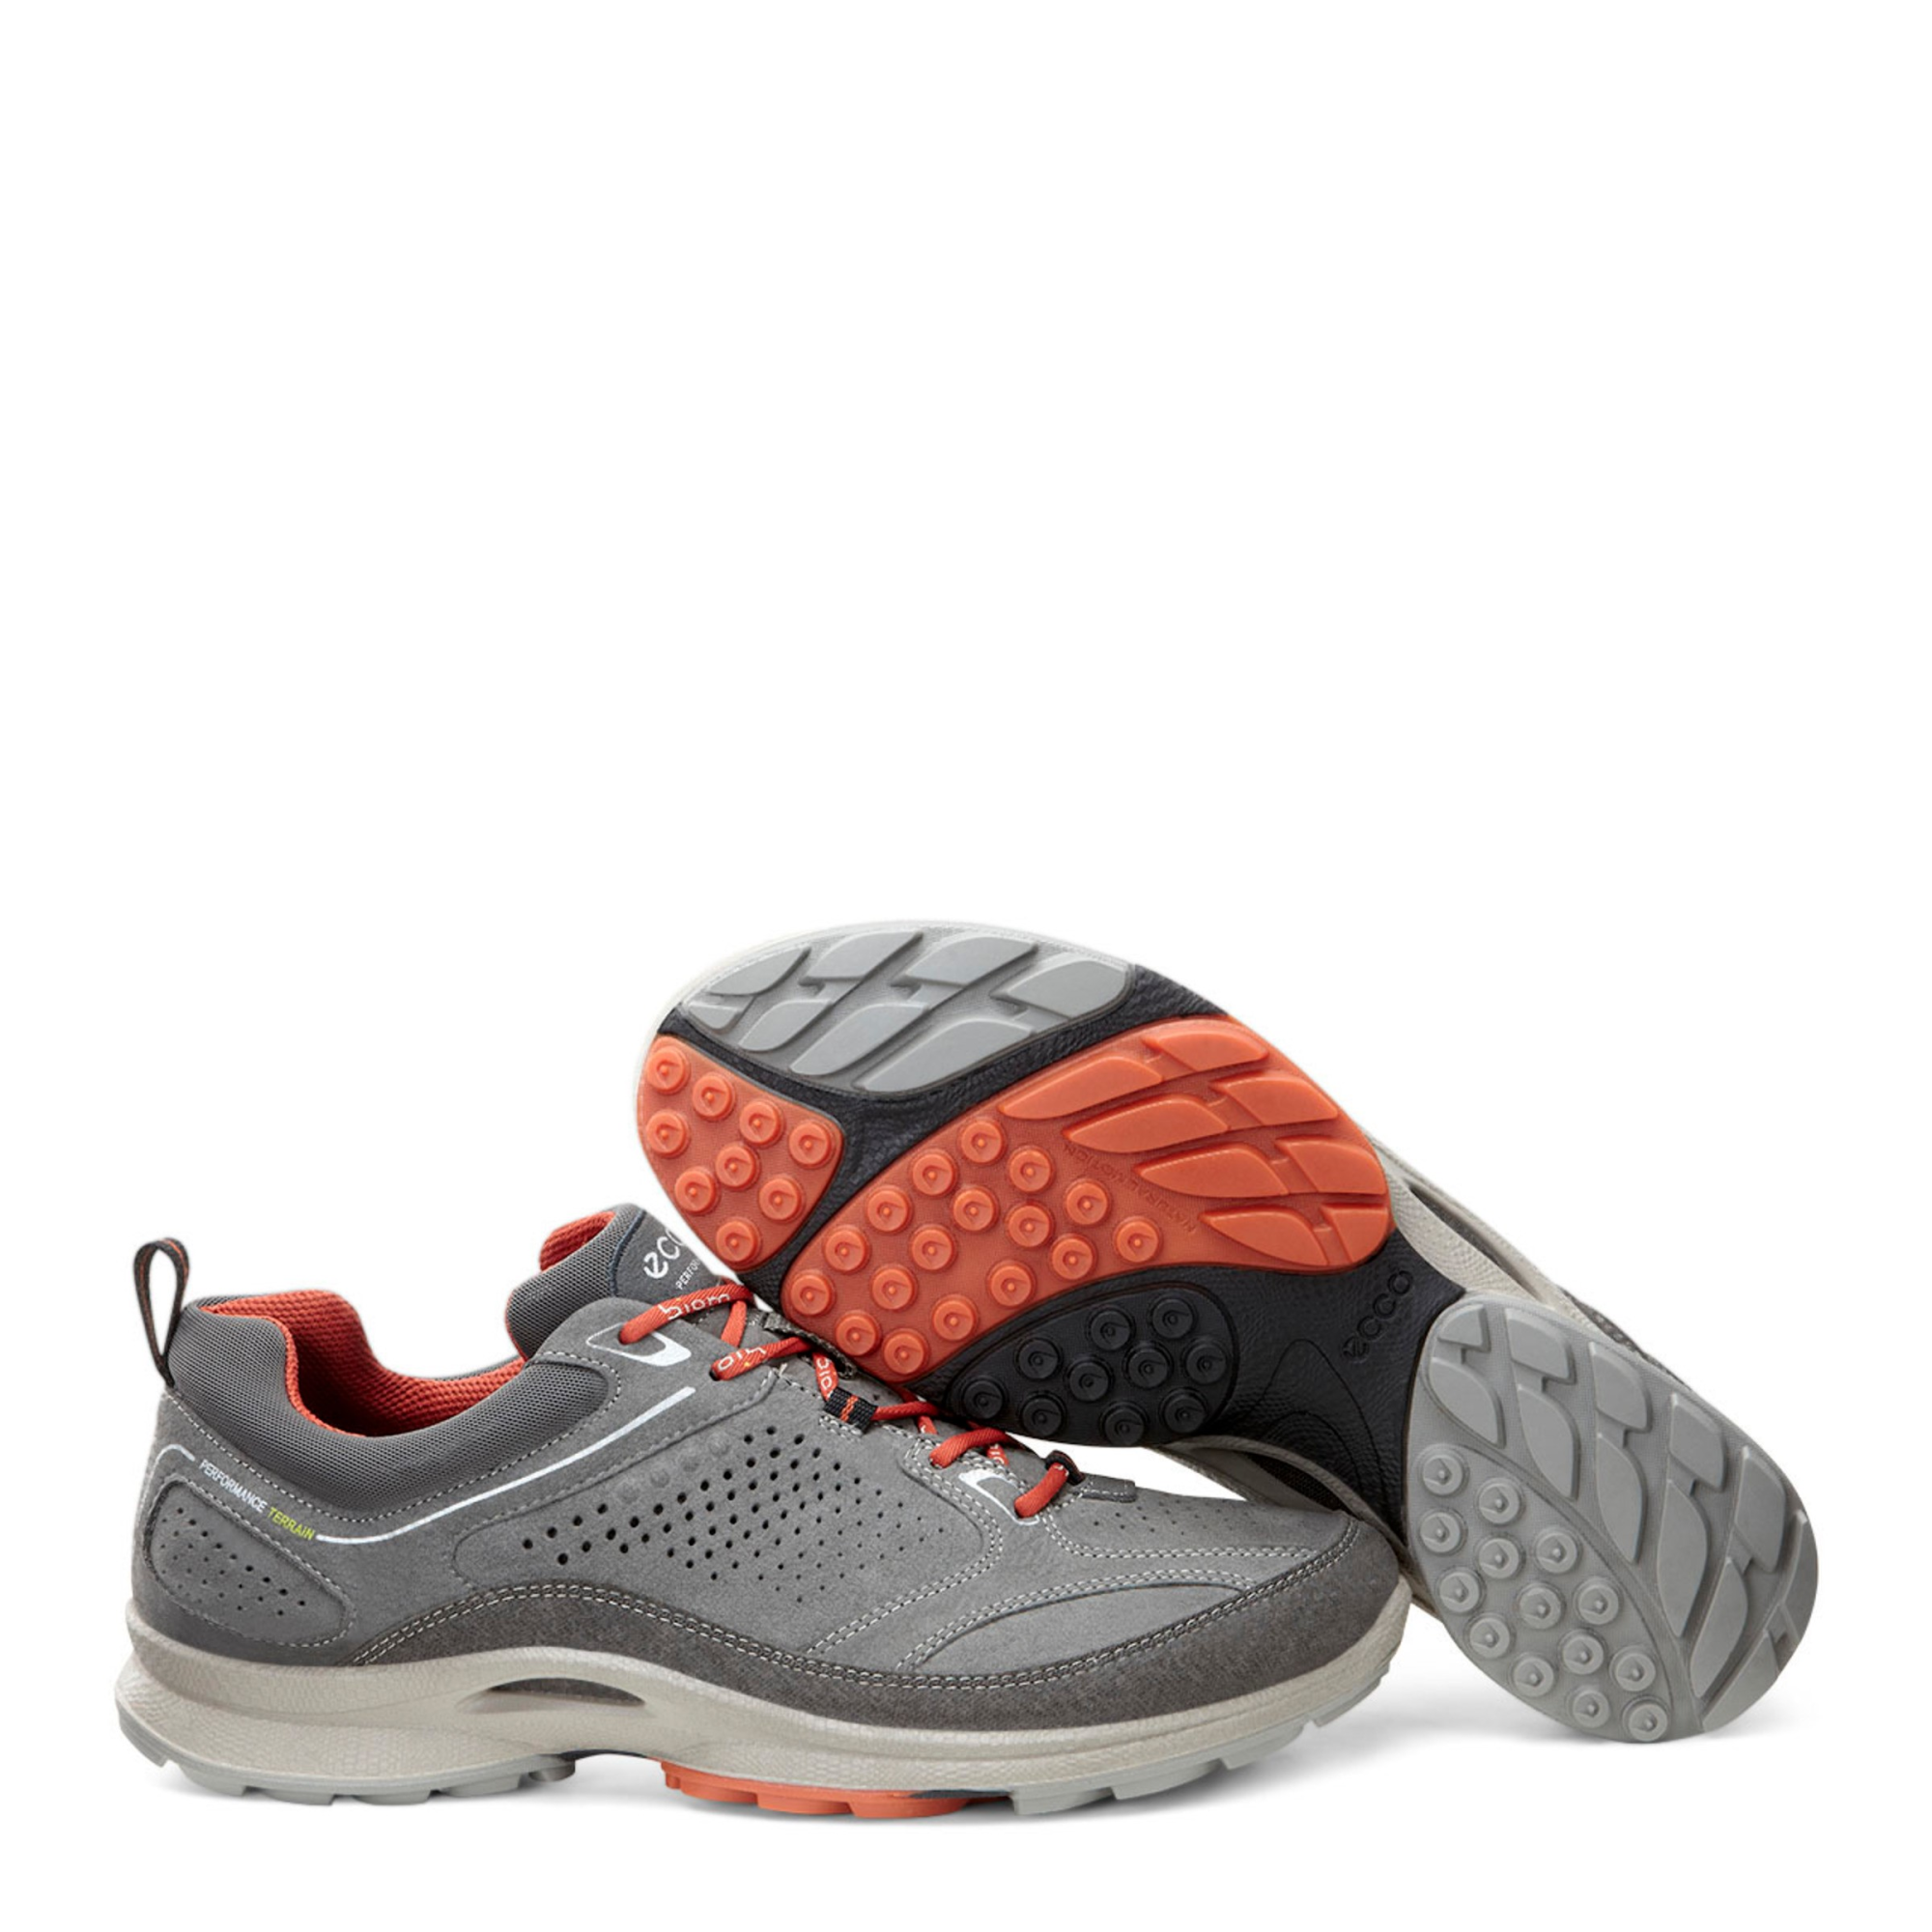 Ecco Mens Ultra Plus 39 - Products - Veryk Mall - Veryk many product, quick response, safe your money!